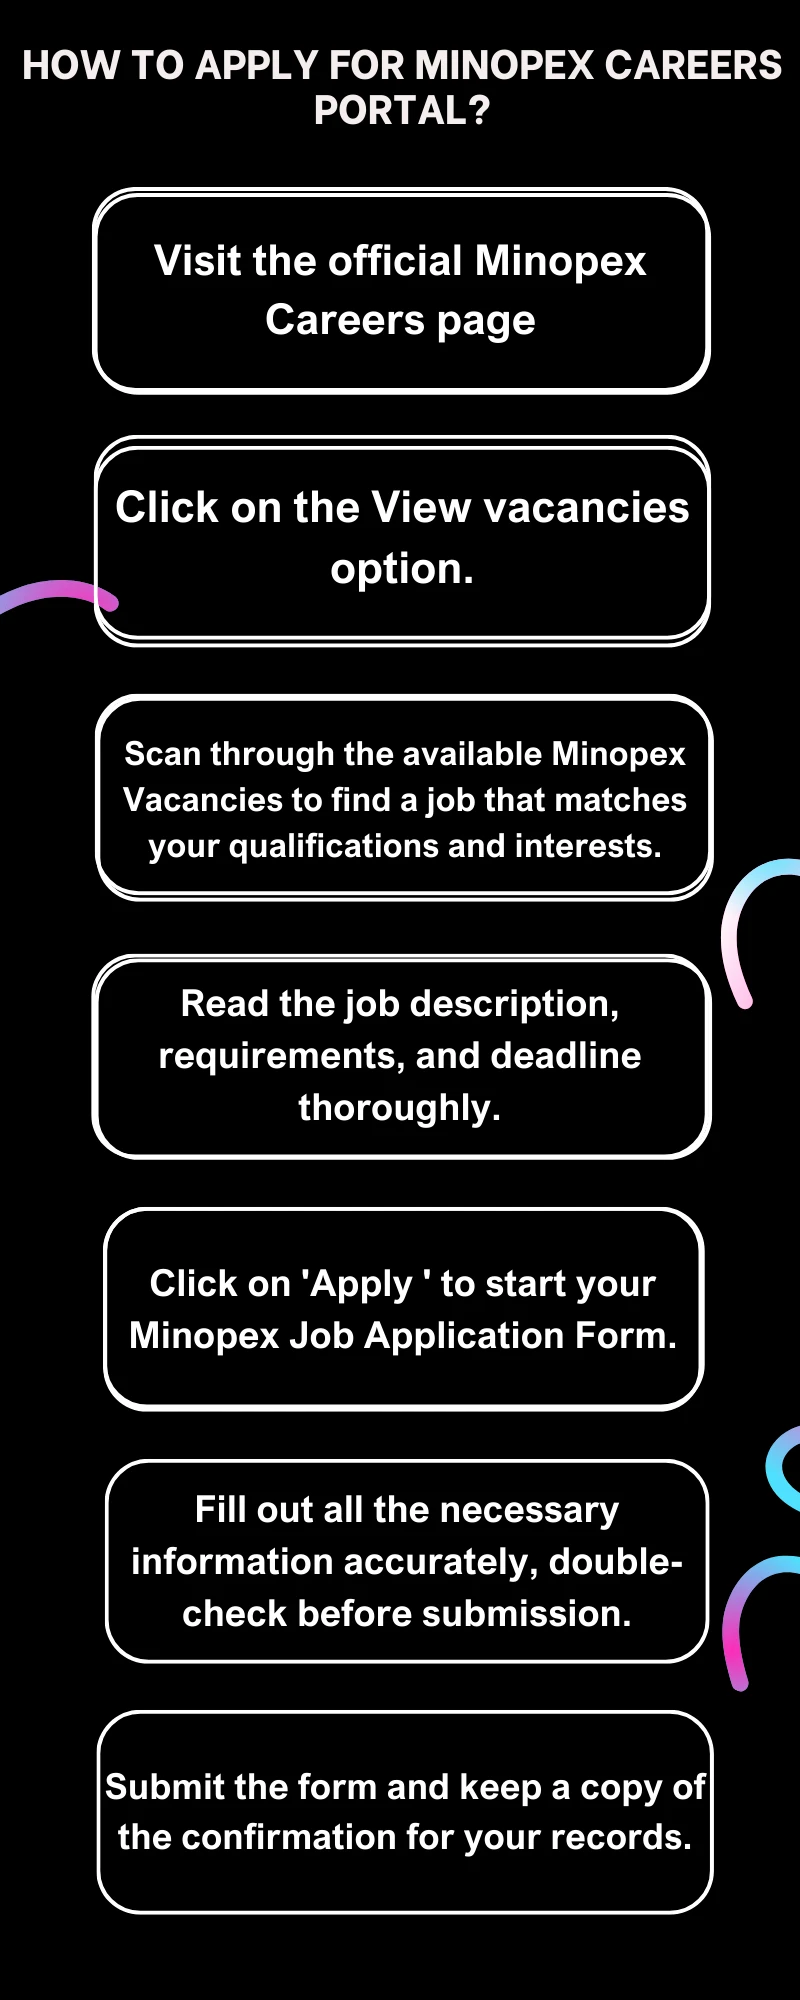 How To Apply for Minopex Careers Portal?